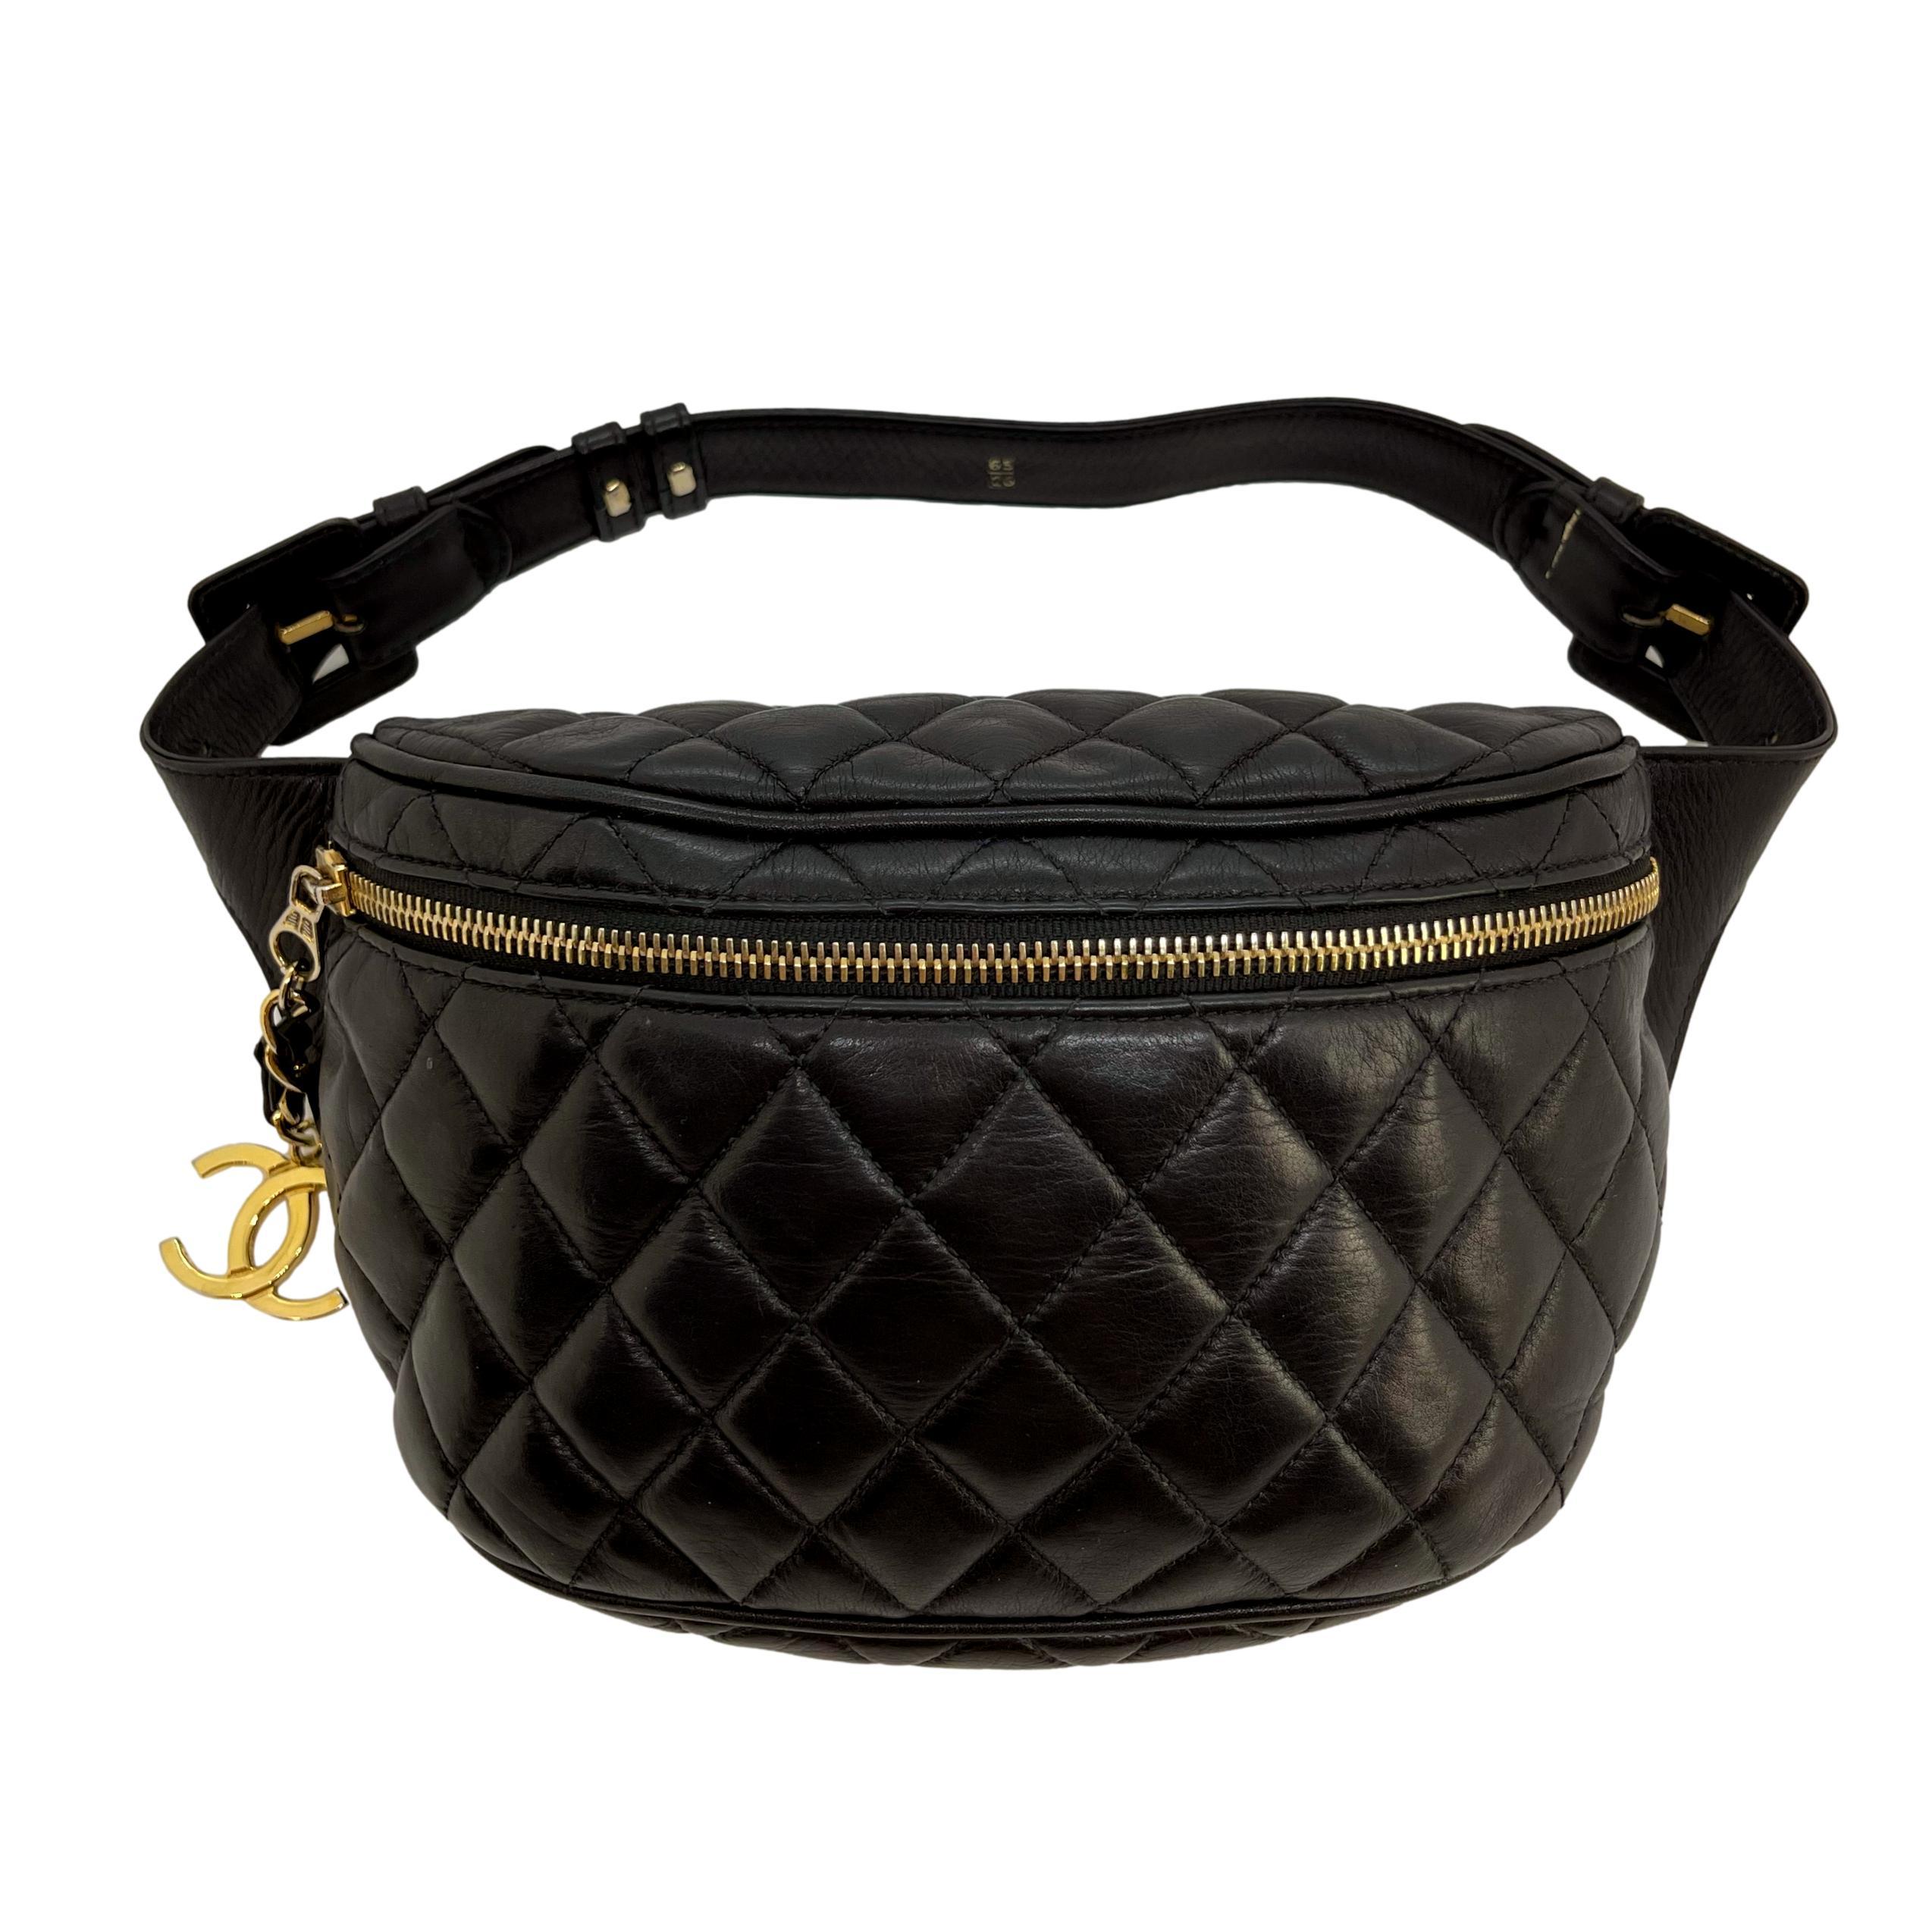 Chanel Quilted Lambskin Waist Belt Bum Bag with Gold Hardware, 1985. After decades of success for the iconic fashion house, the 1980's sought a new modern approach for the Chanel brand in which designer Karl Lagerfield was added as creative